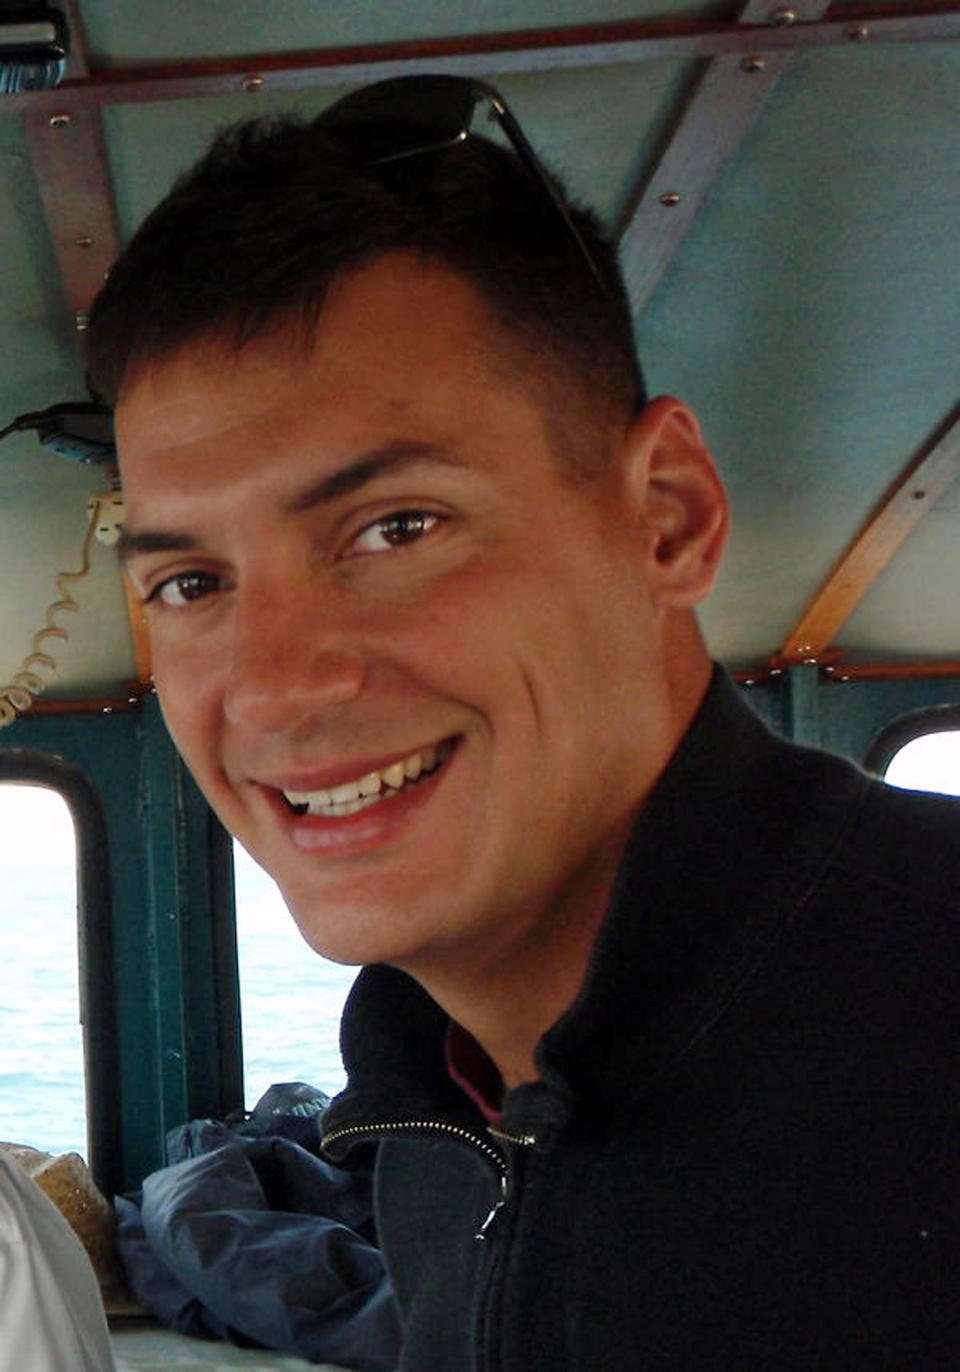 FILE - In this undated photo obtained from the family of Austin Tice, shows American freelance journalist Austin Tice, 31, who has been missing in Syria since mid-August, 2012. A top Lebanese security official Maj. Gen. Abbas Ibrahim said on Saturday Nov. 14, 2020, that after returning from Washington recently he visited Syria for two days where he spoke with officials about American journalist Austin Tice who has been missing in the war-torn country since 2012. (\Family of Austin Tice via AP, File)